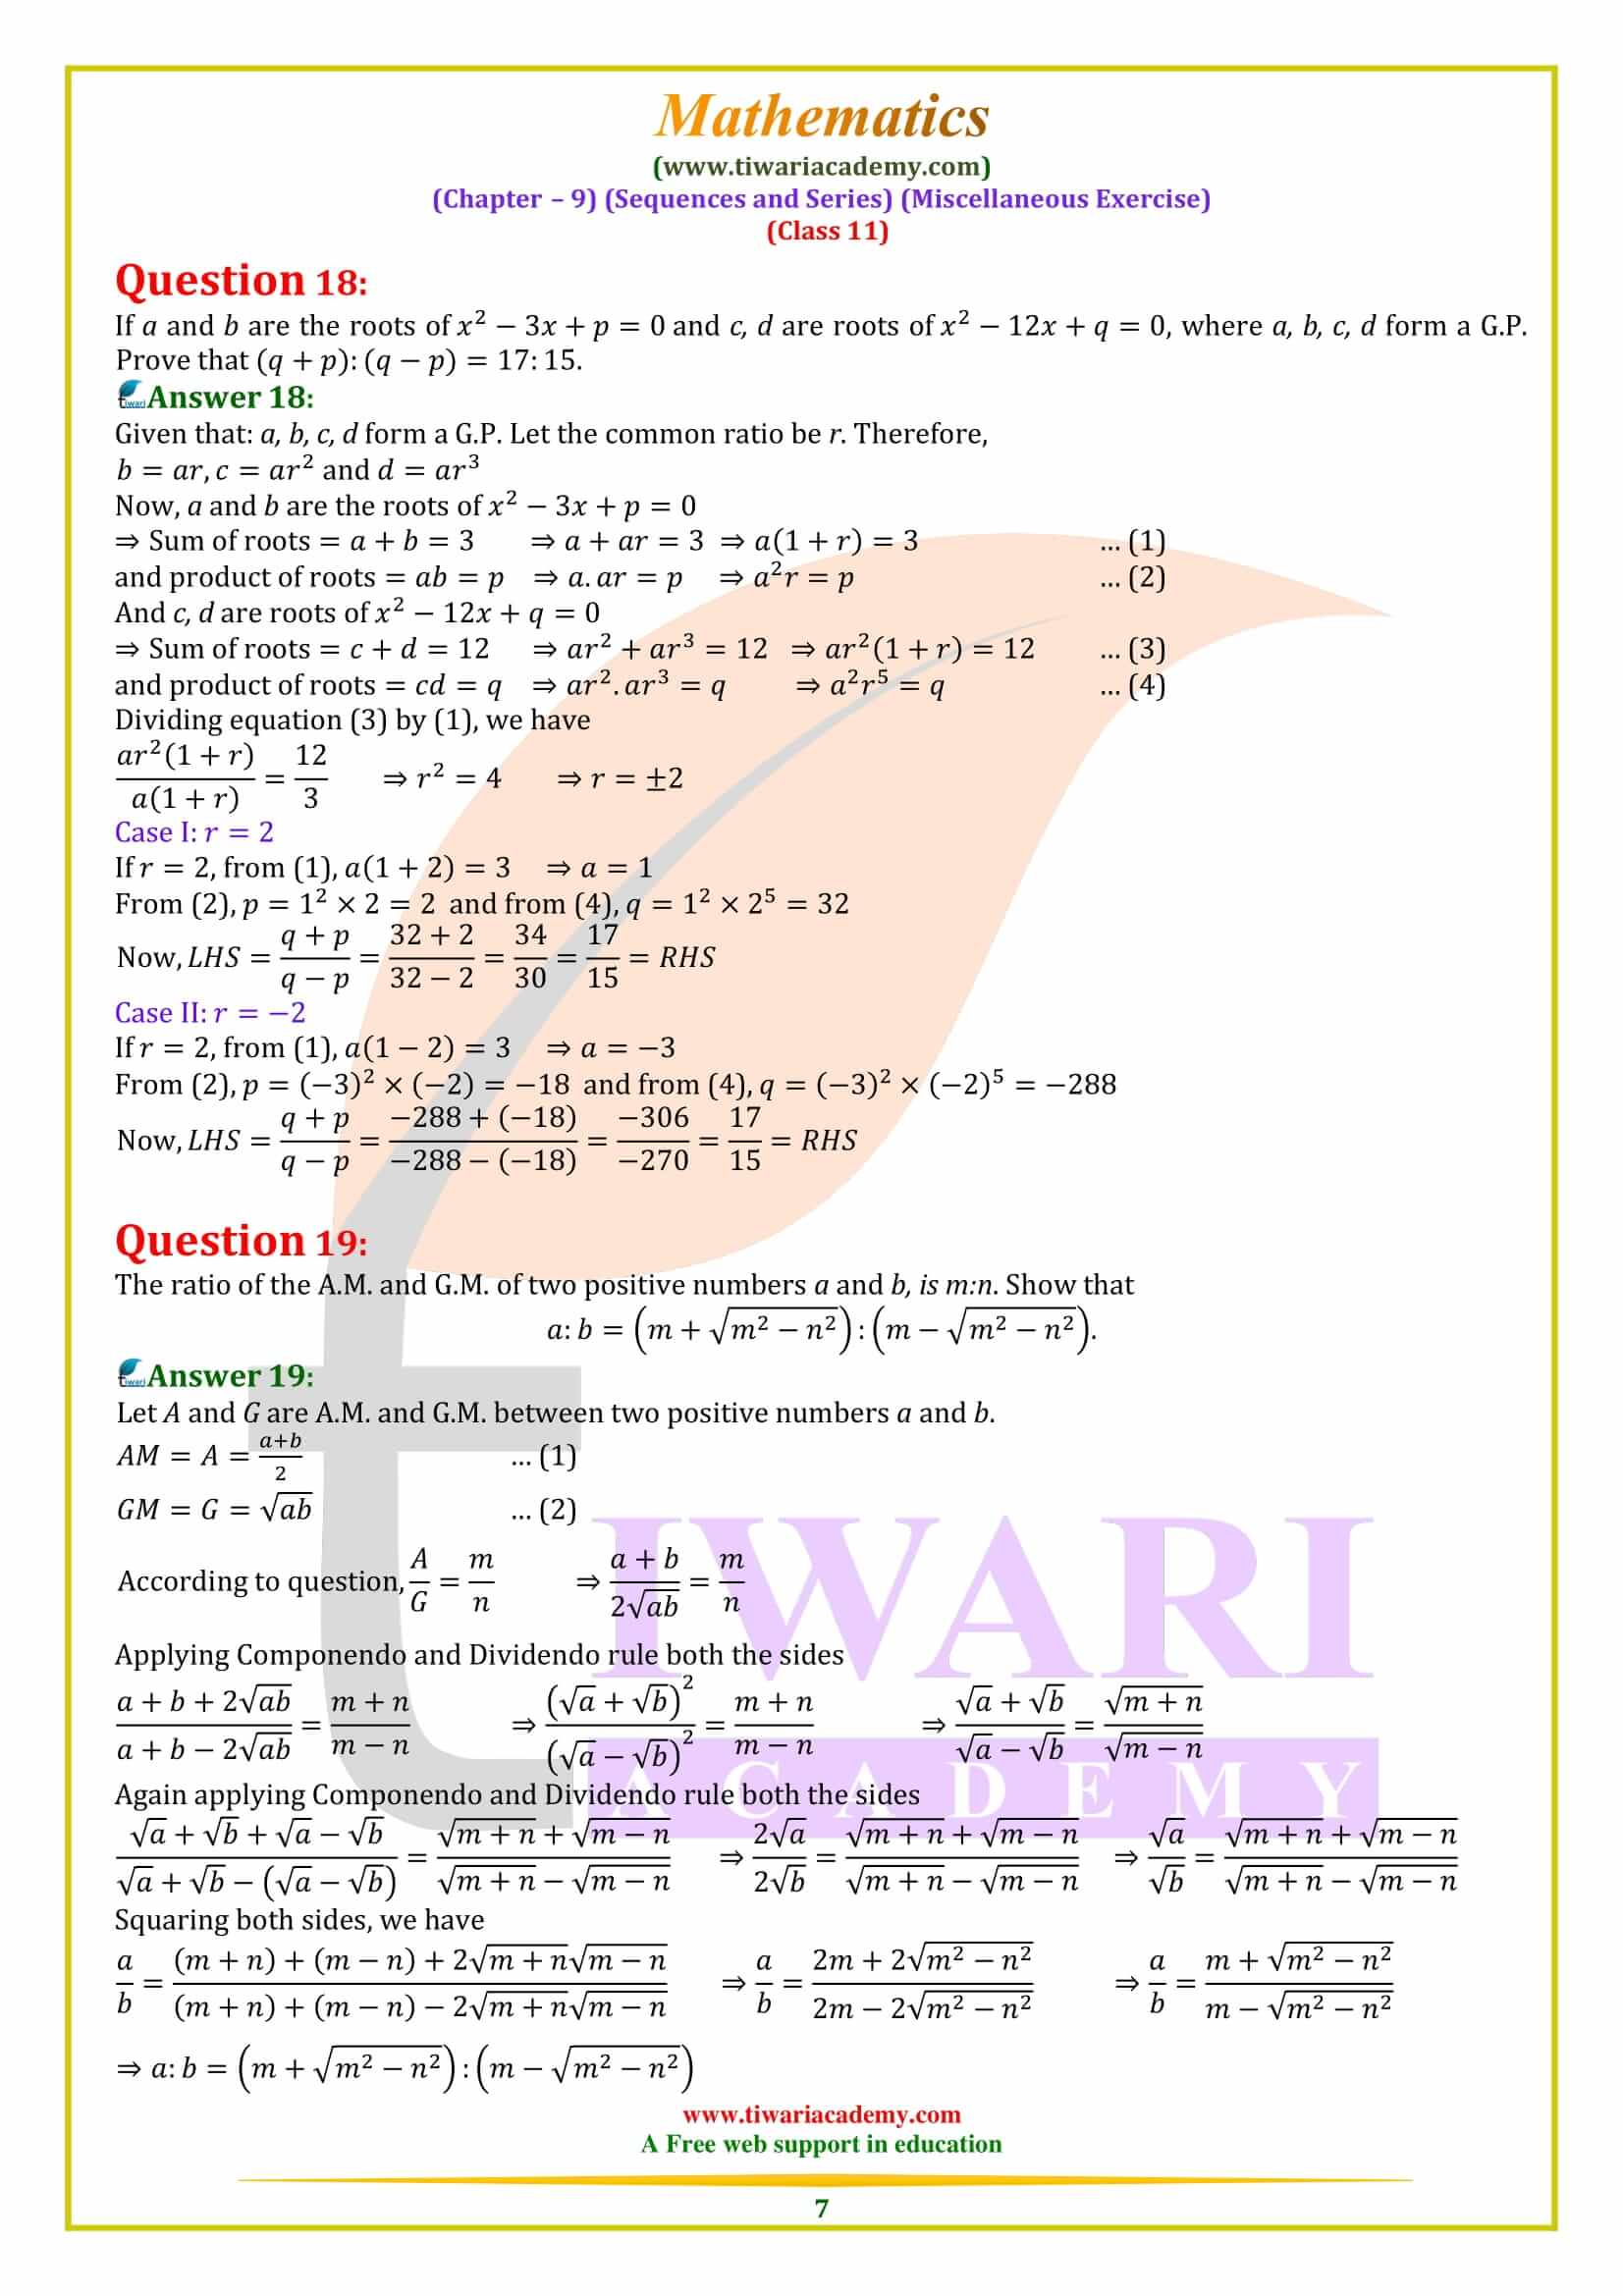 NCERT Solutions for Class 11 Maths Chapter 9 Miscellaneous Exercise guide